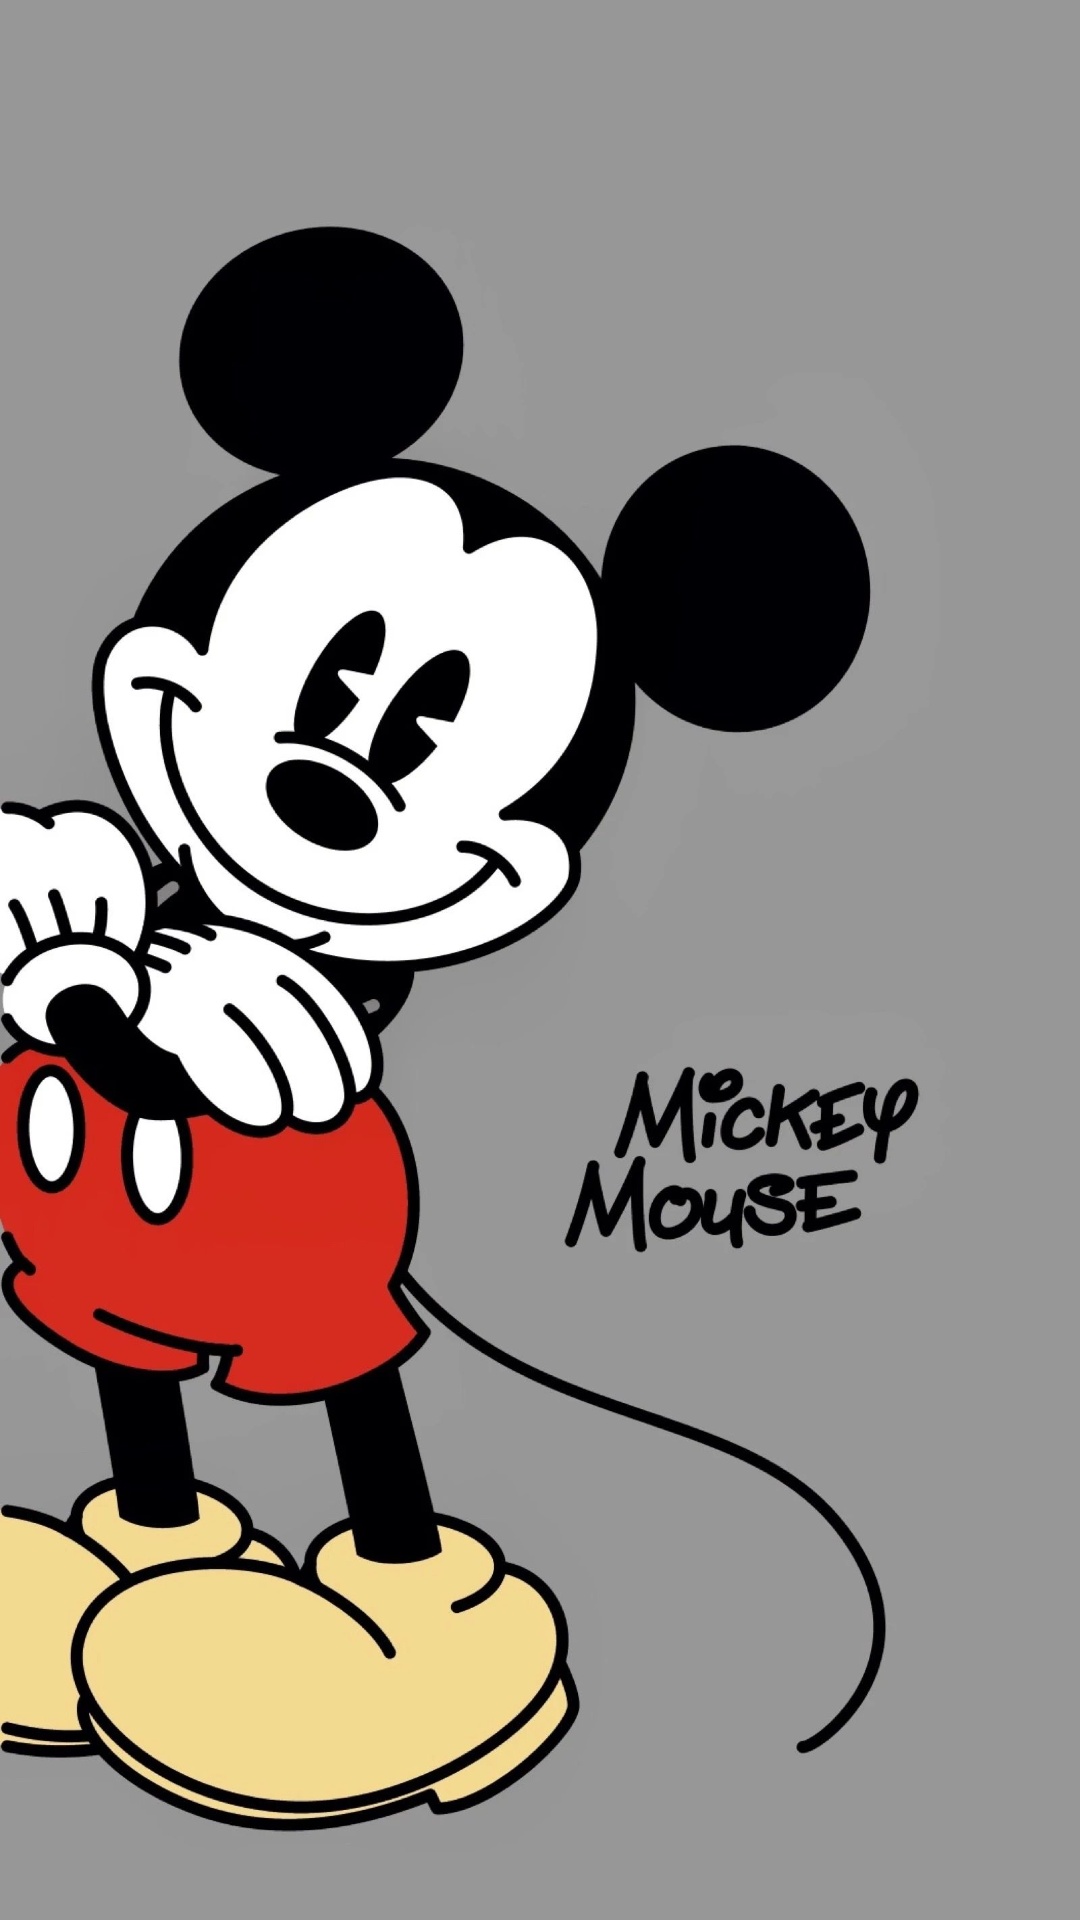 Mickey Mouse Wallpaper Images